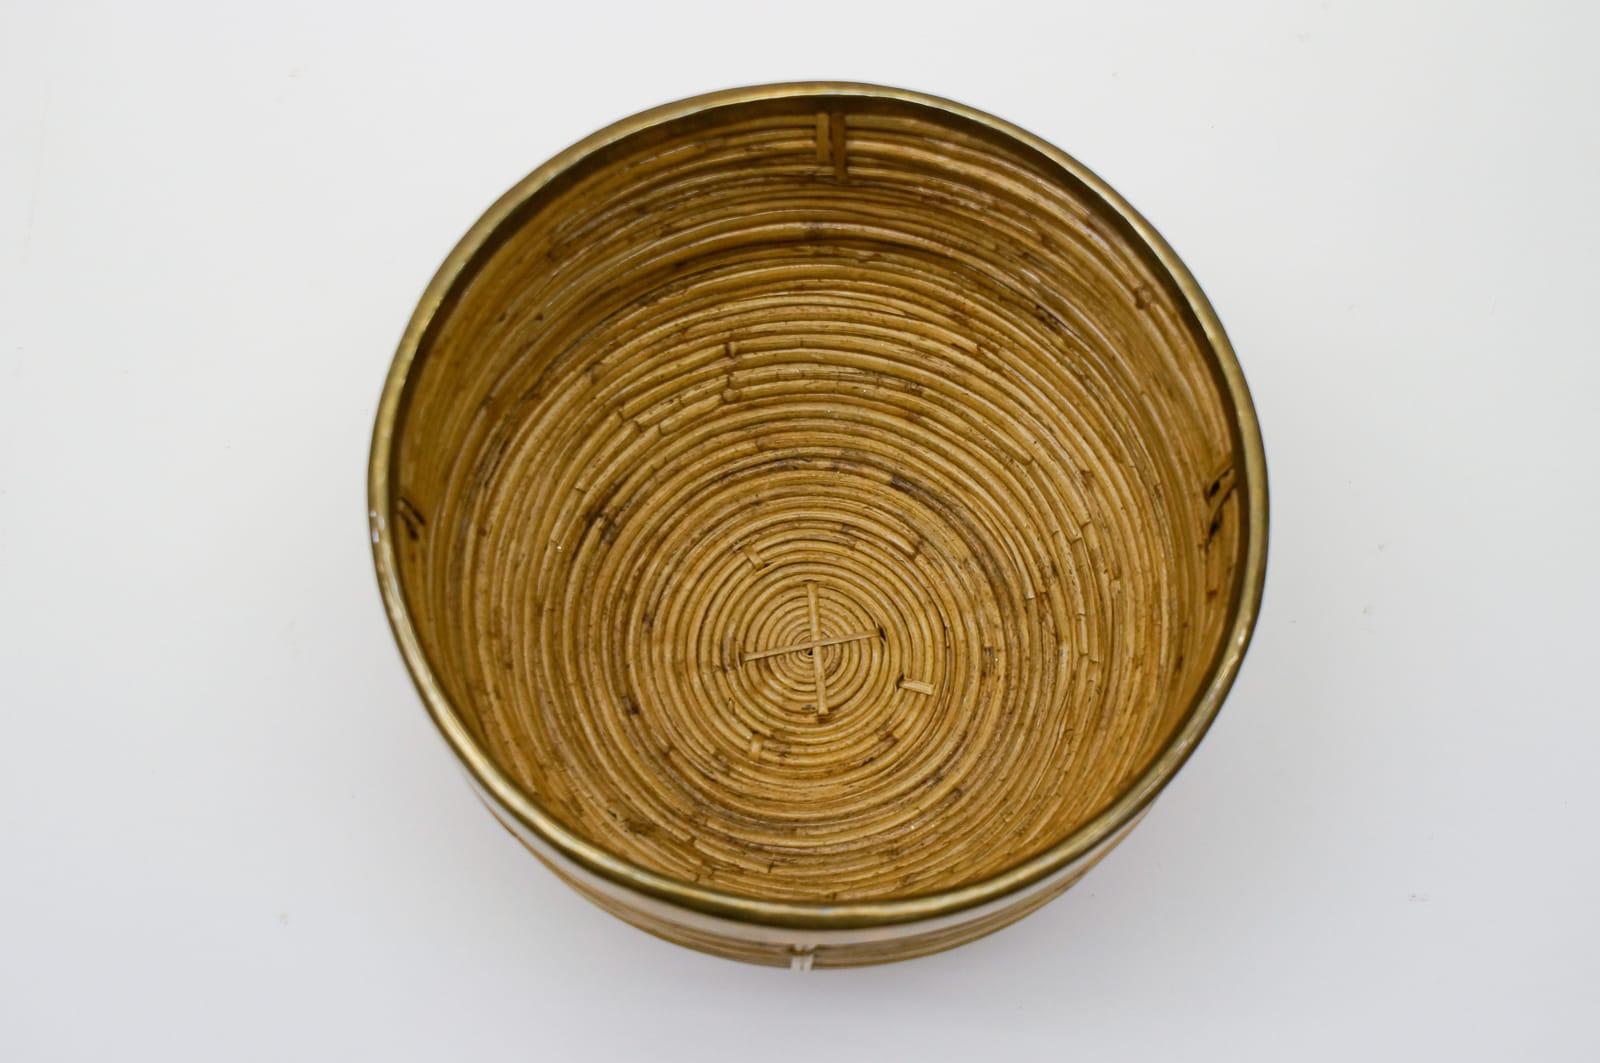 Mid-20th Century Large Rattan and Brass Midcentury Handcrafted Bowl, Austria, 1950s For Sale